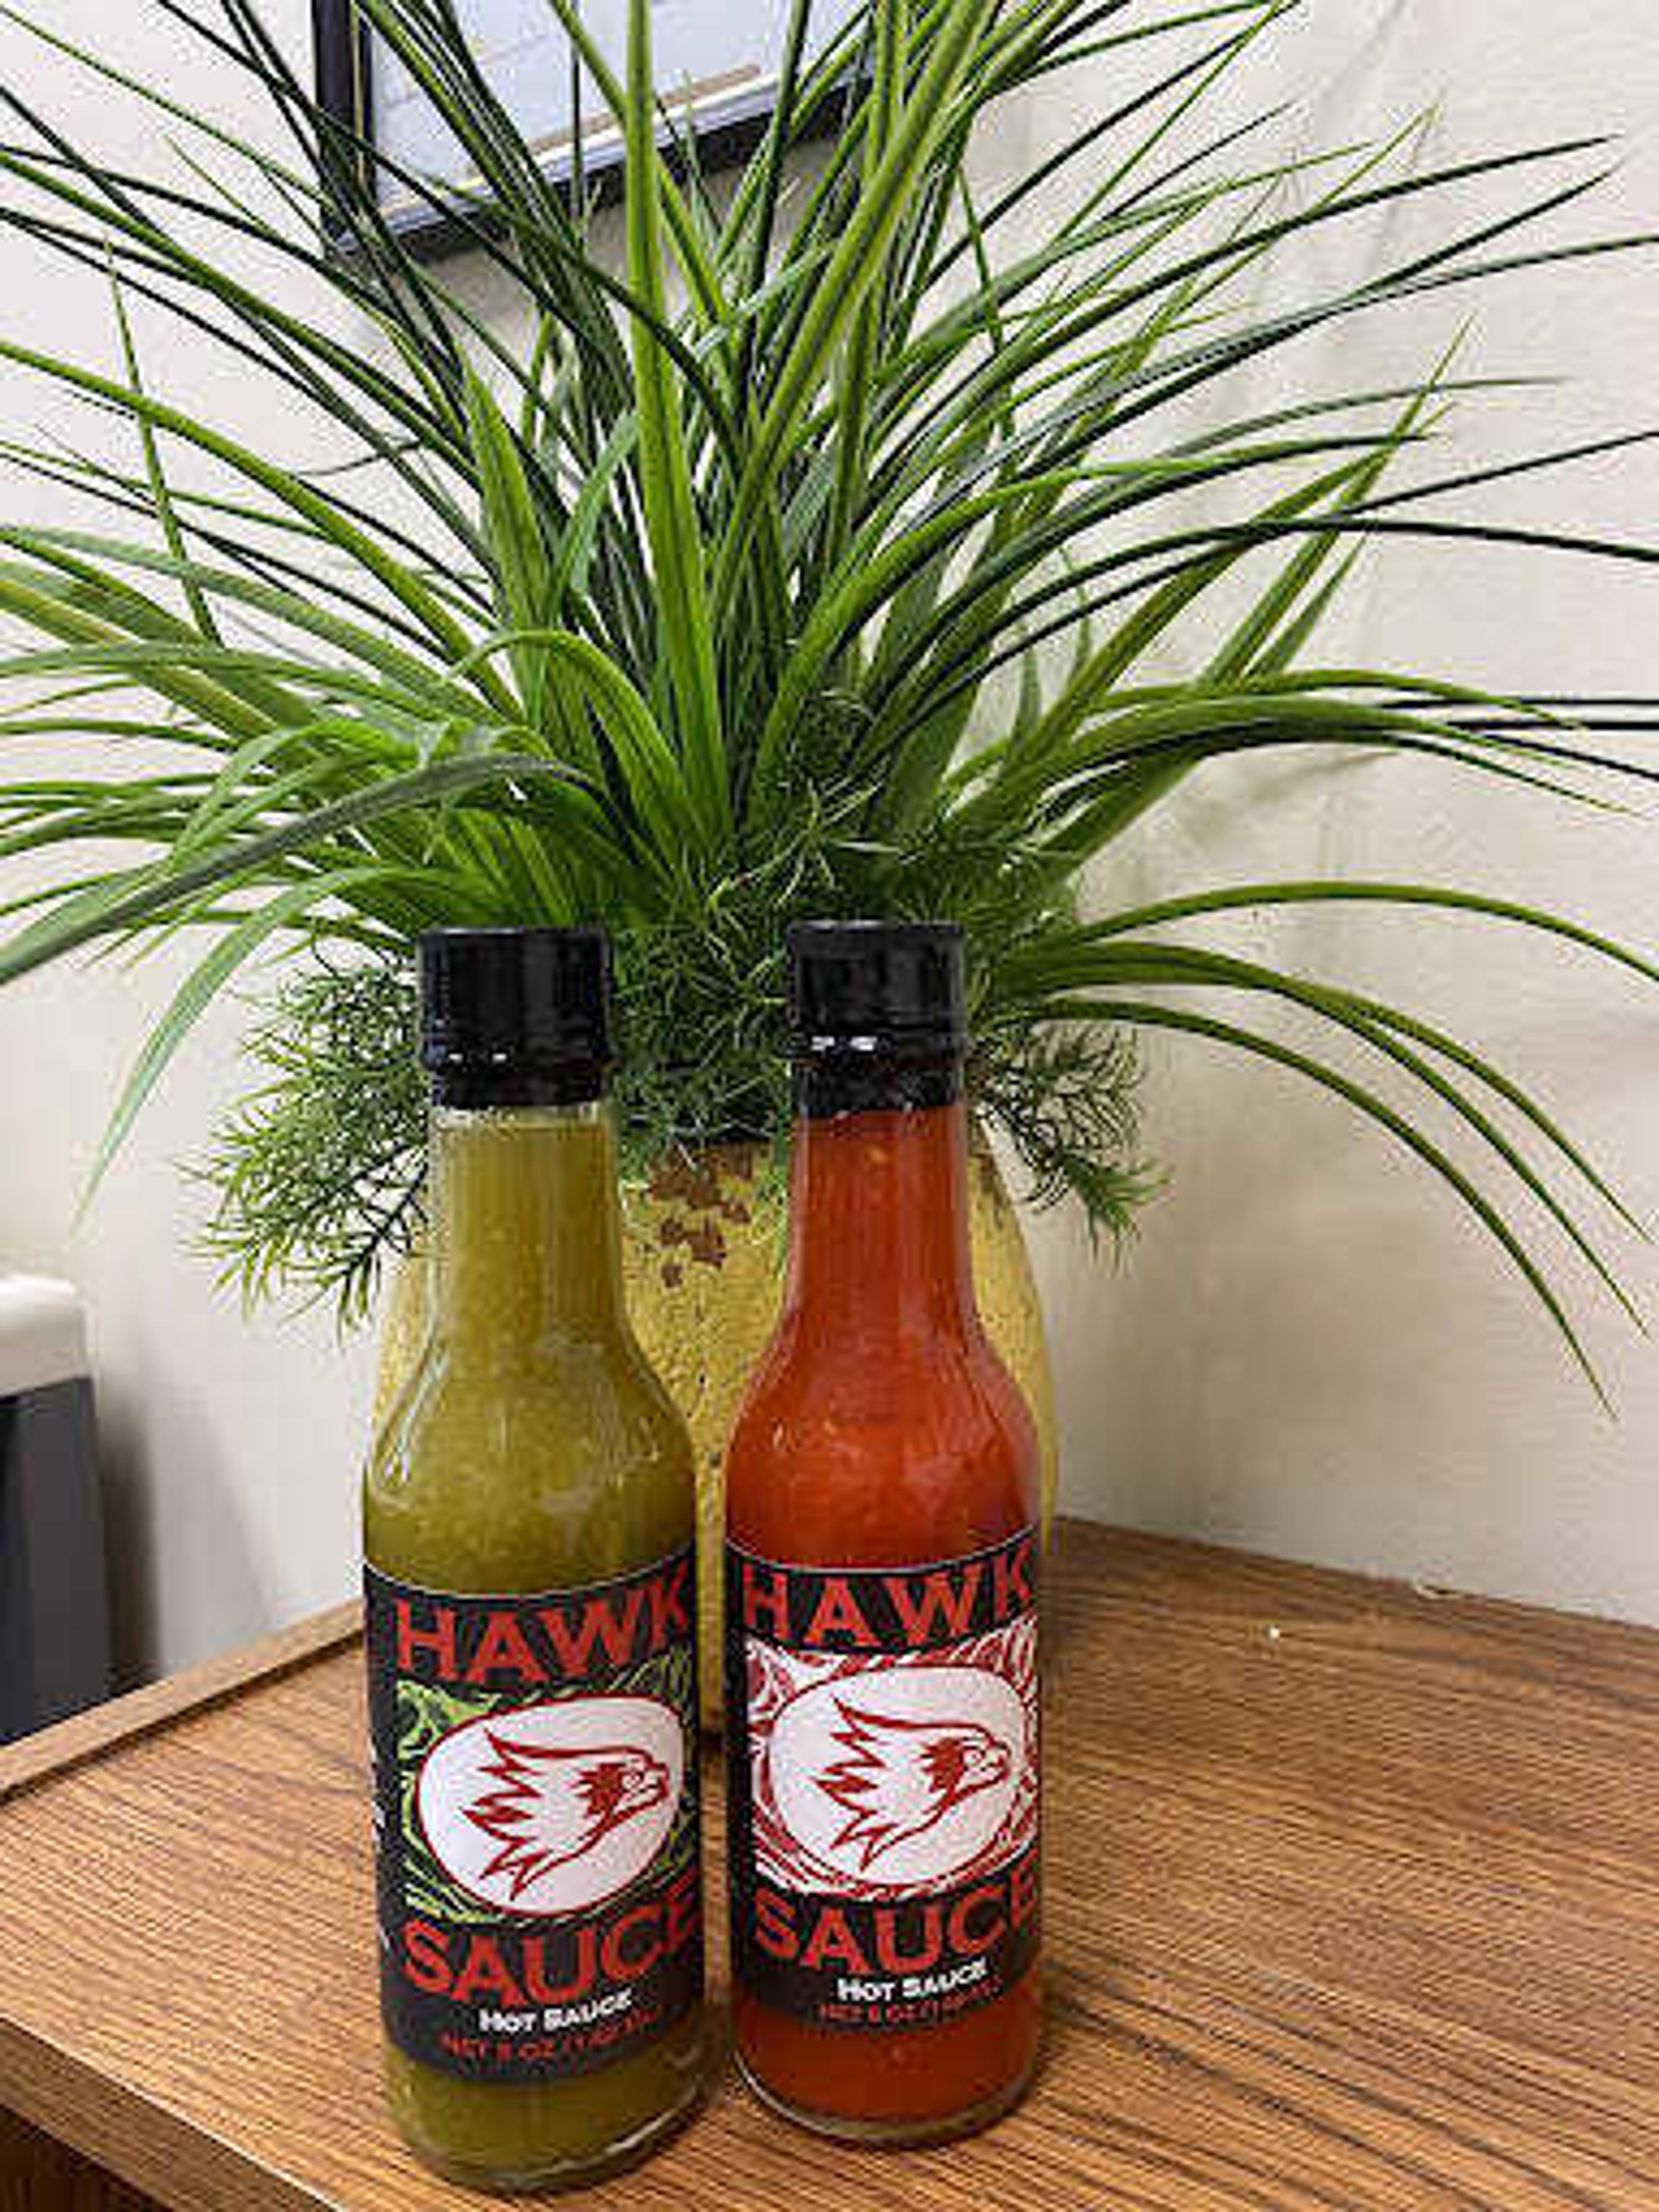 SEMO hospitality management department gives students glimpse into “real world” with Hawk Sauce